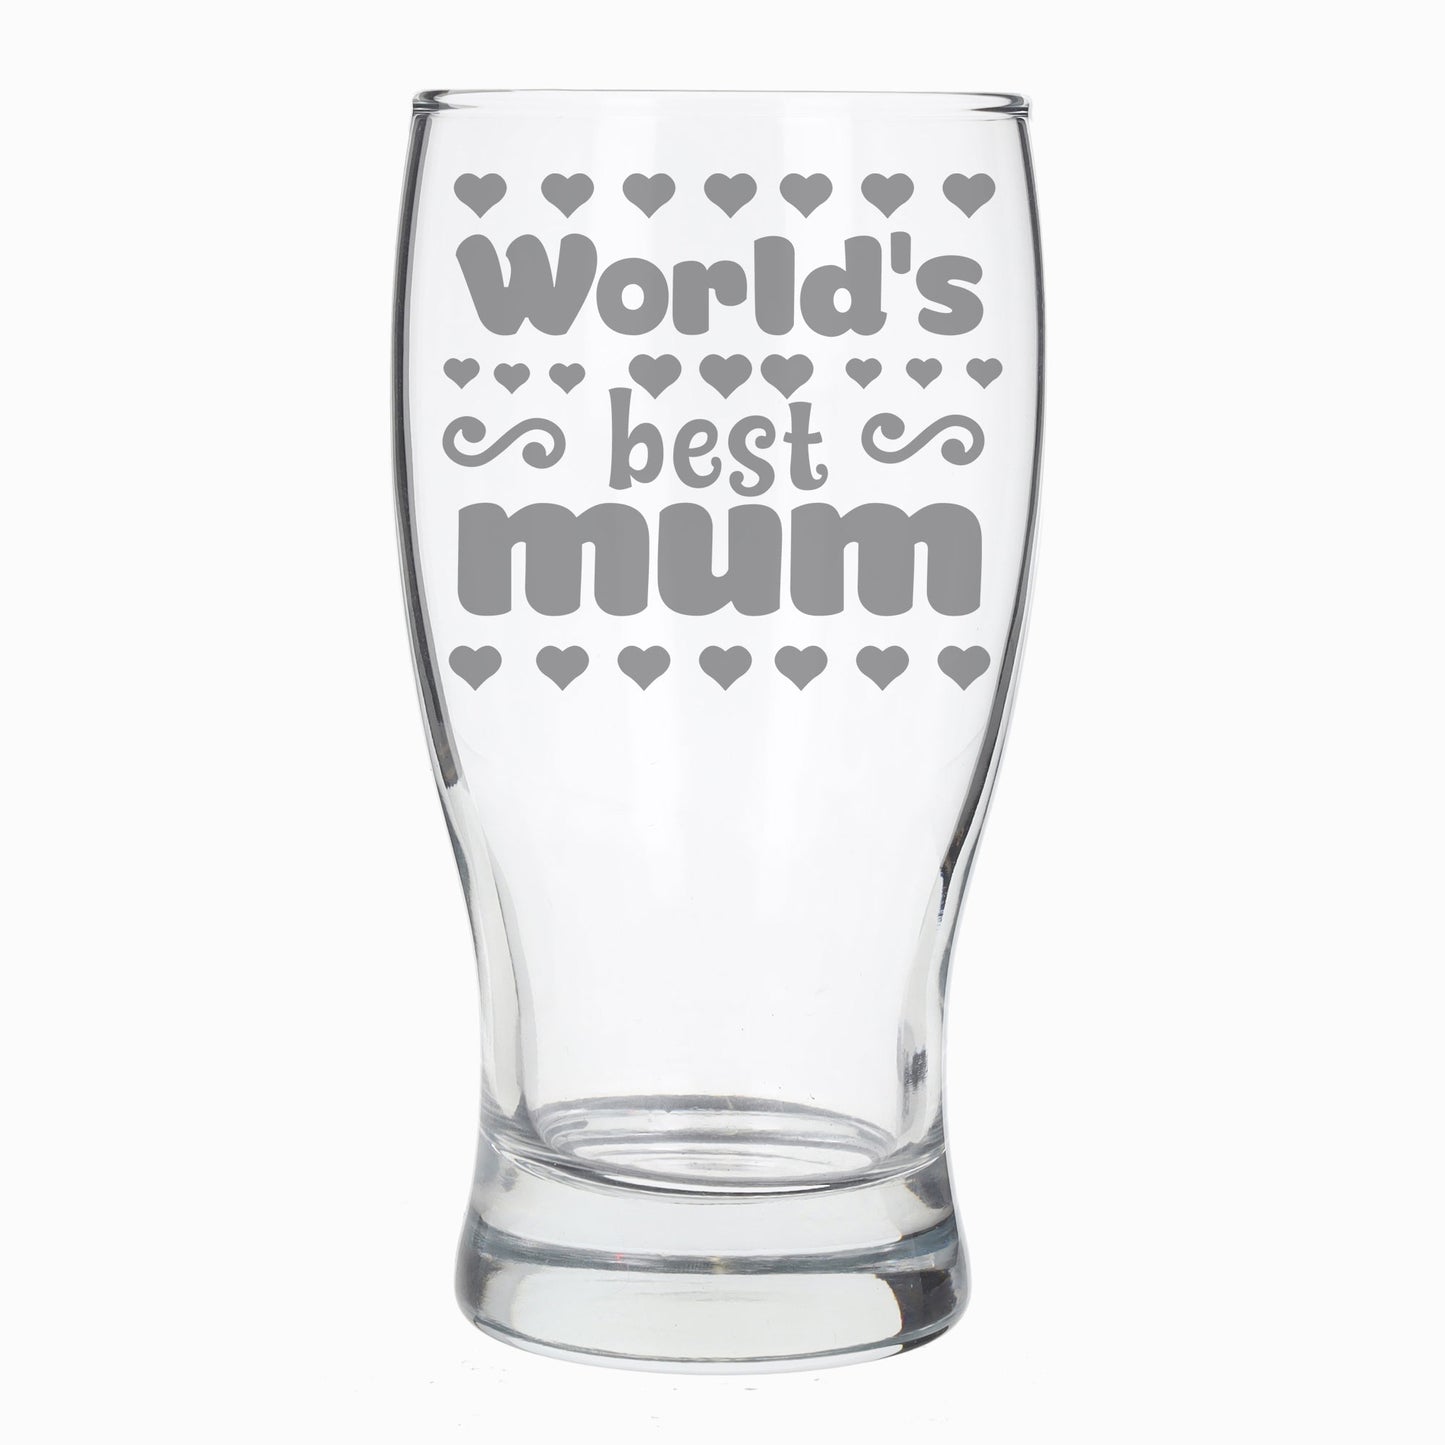 Worlds Best Mum Engraved Beer Glass and/or Coaster Set  - Always Looking Good - Beer Glass Only  